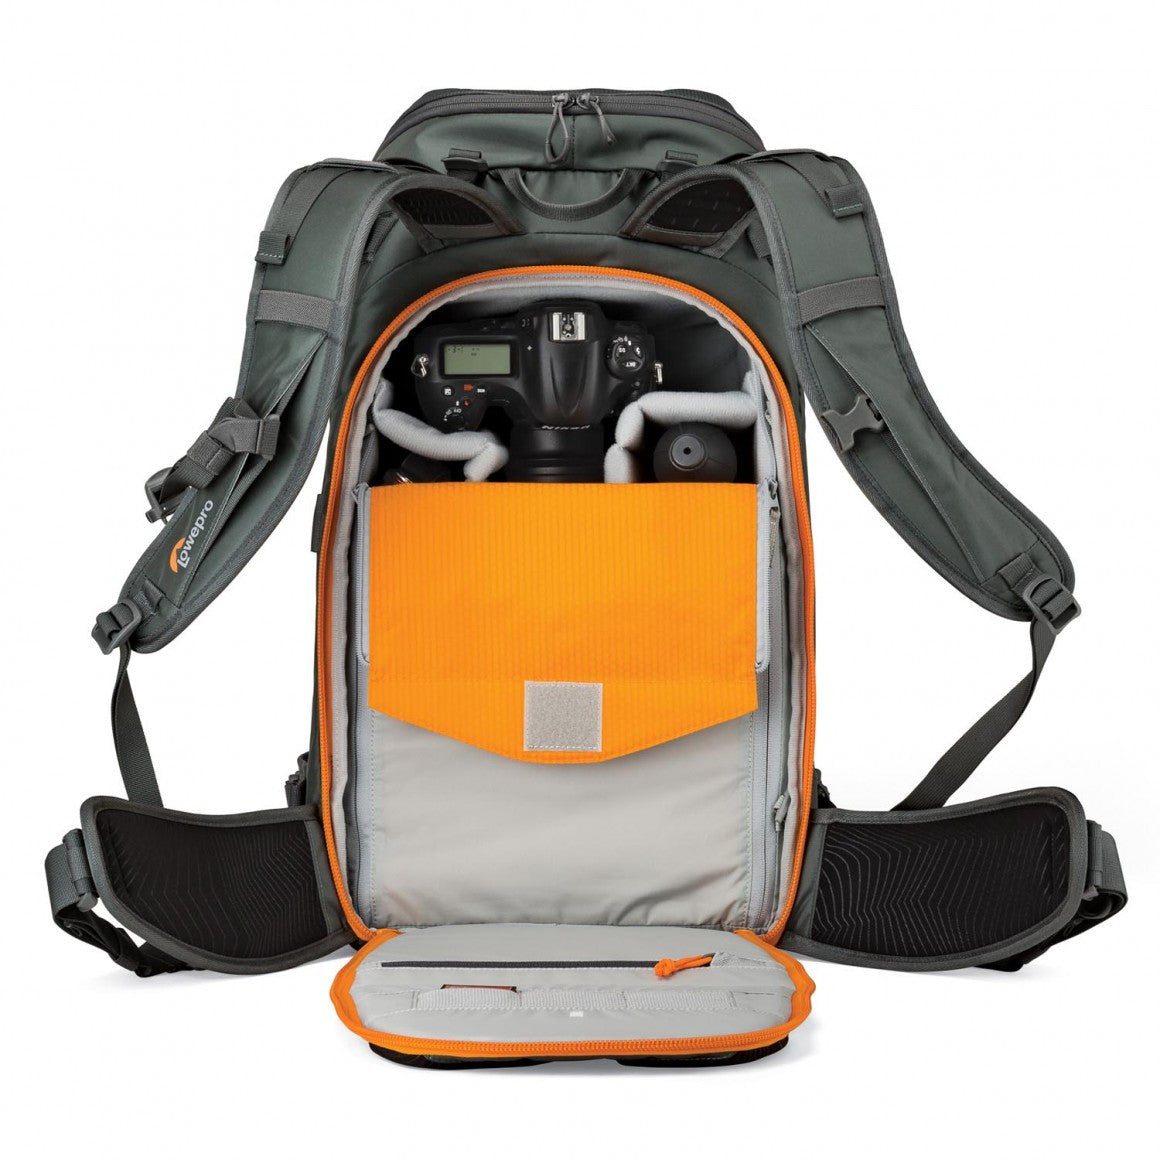 Lowepro Whistler 350AW Backpack (Grey), bags backpacks, Lowepro - Pictureline  - 5